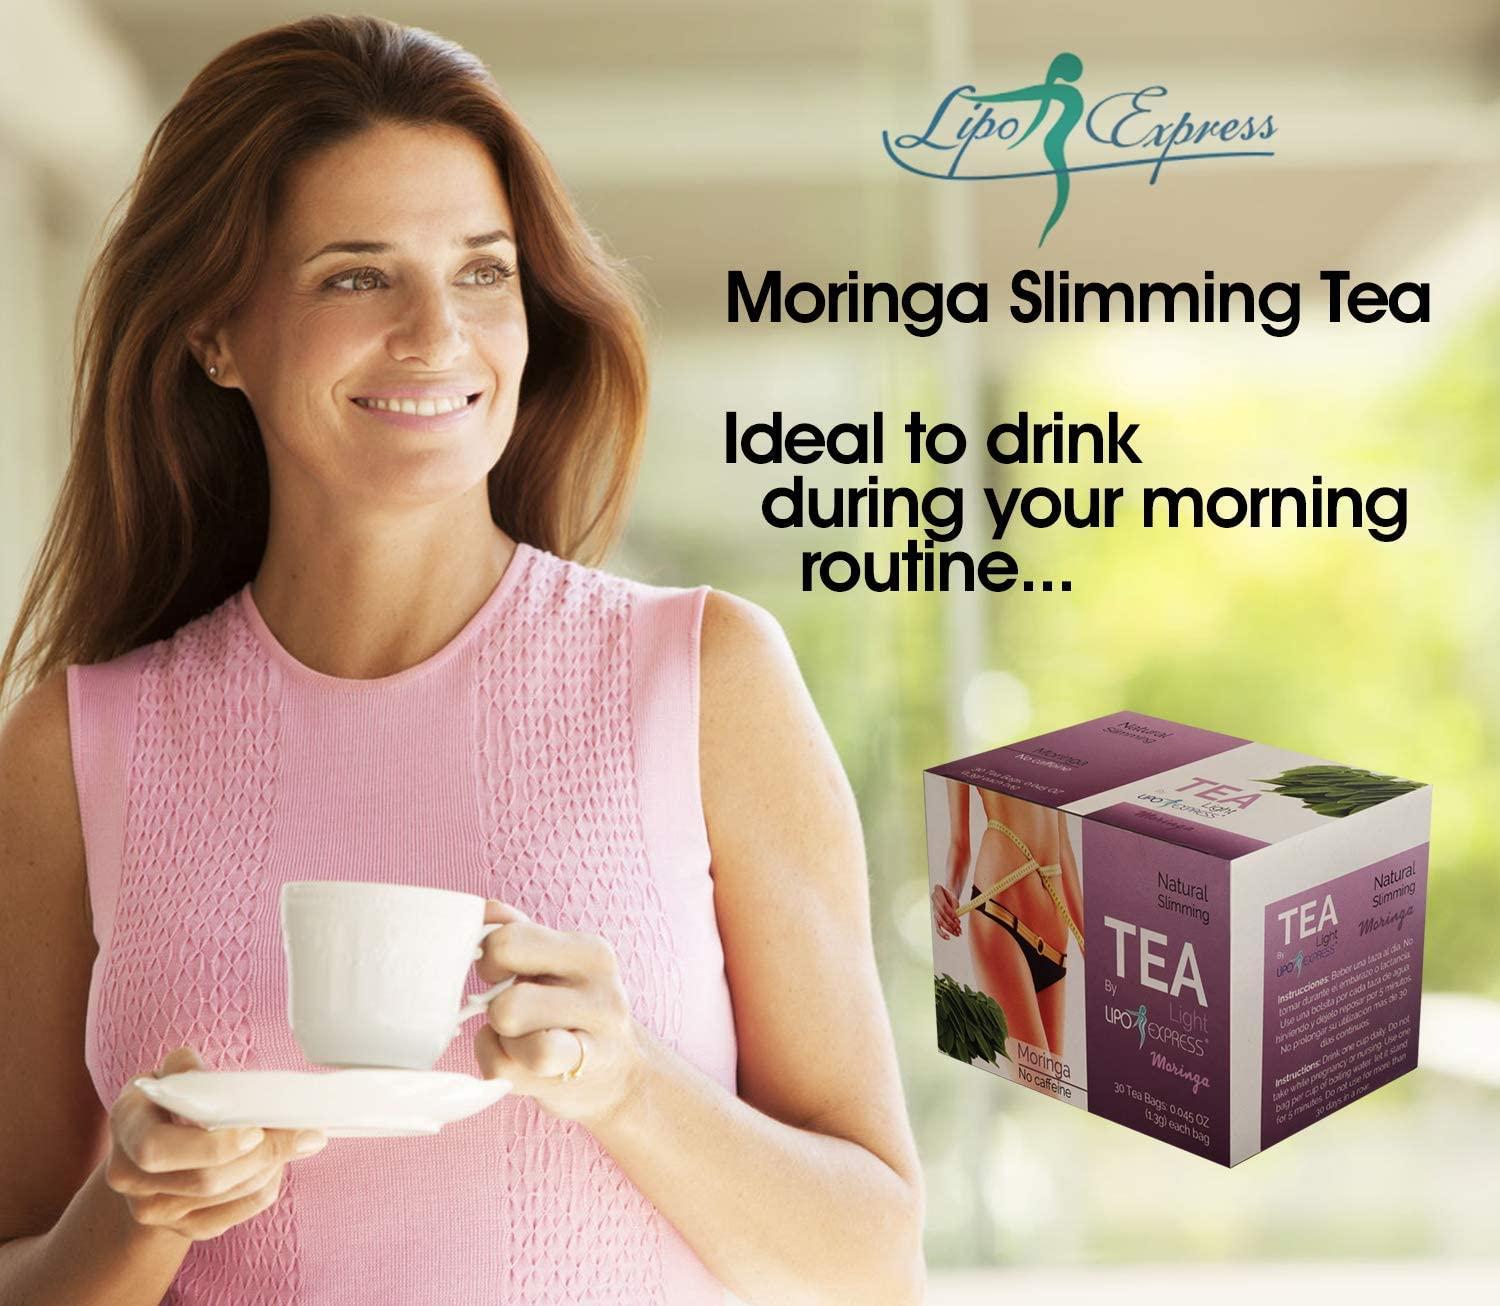 Weight Loss Tea Detox Tea Lipo Express Body Cleanse, Reduce Bloating, &  Appetite Suppressant, 30 Day Tea-tox, with Potent Traditional 100% Naturals  Herbs. Energy Booster. (Moringa Tea)